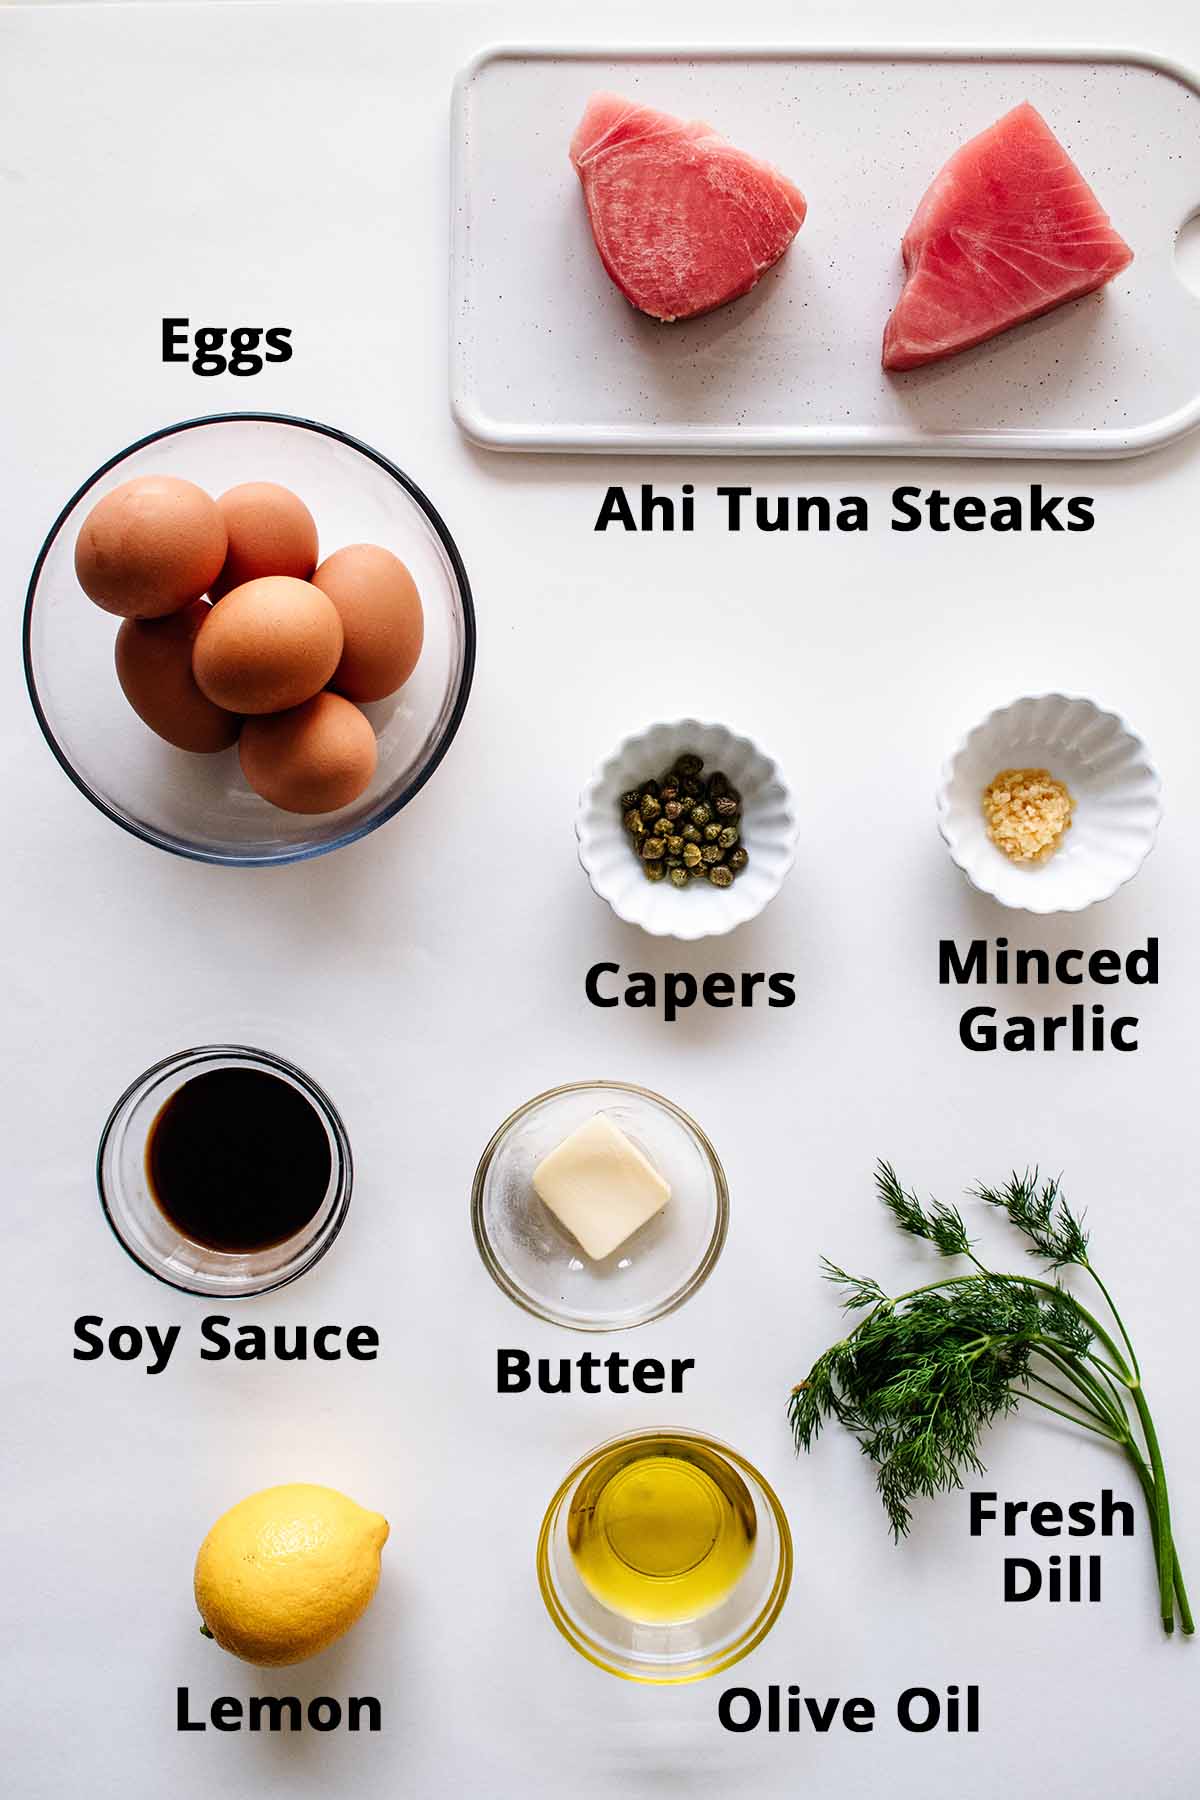 Tuna omelette ingredients